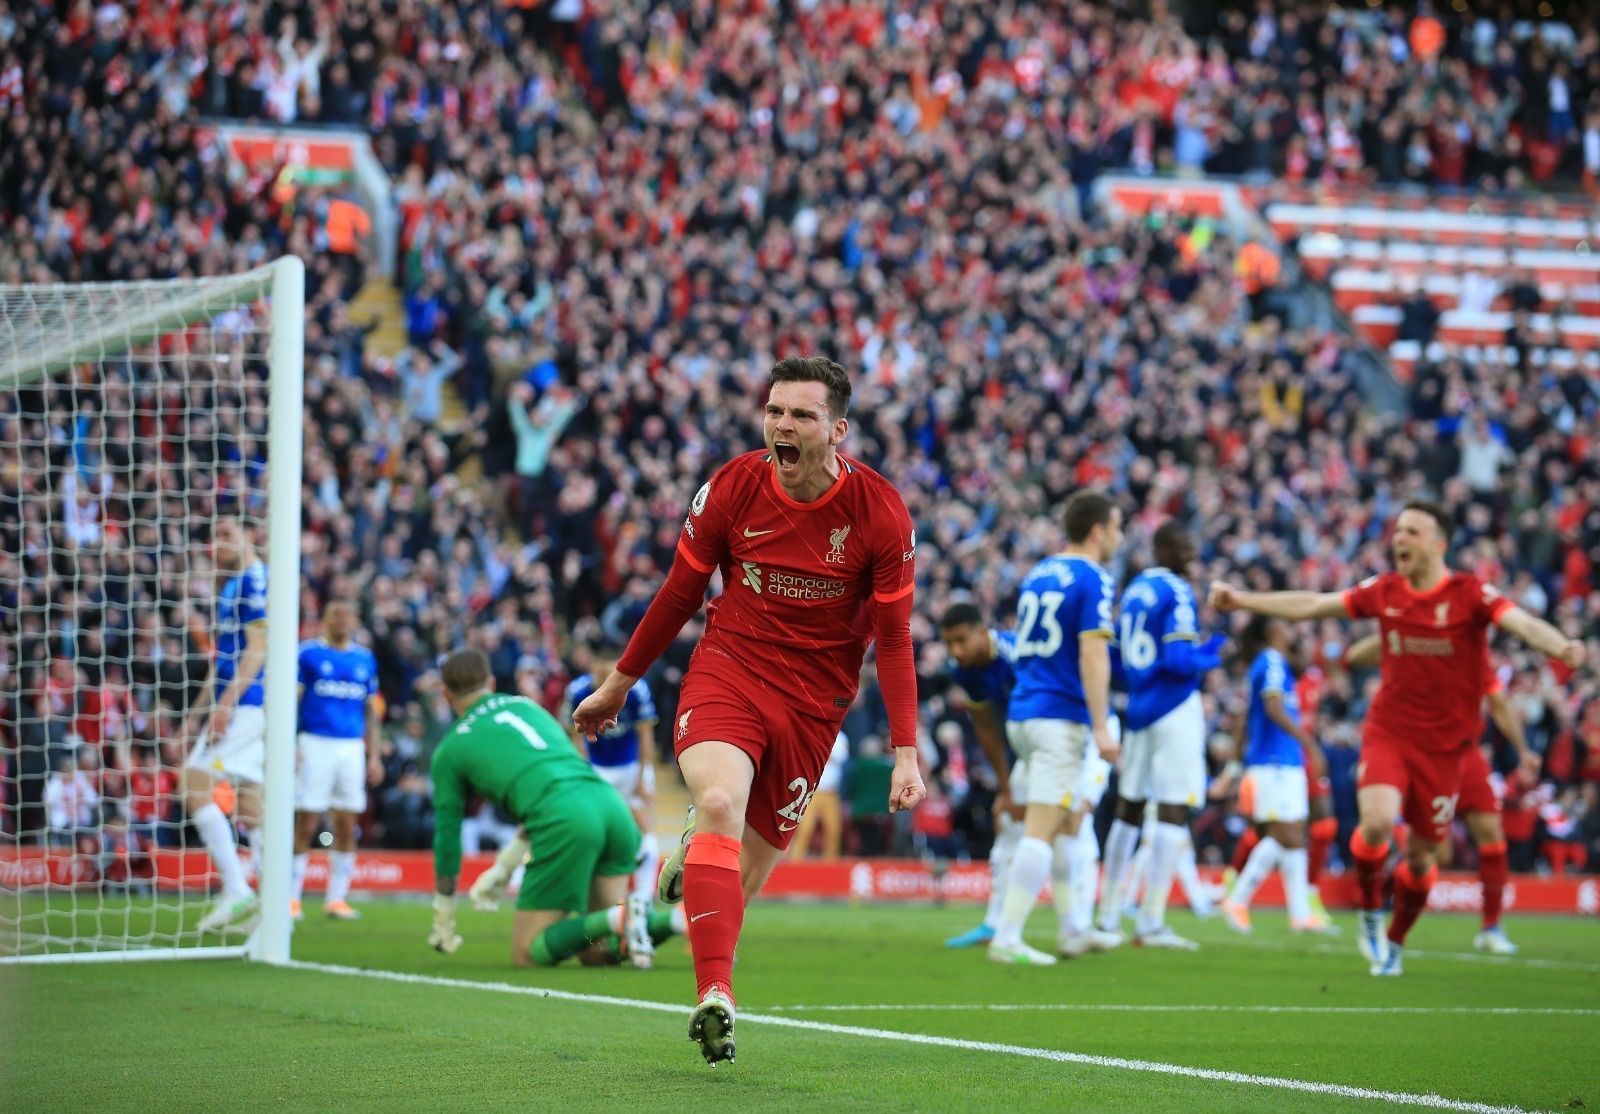 Liverpool defeated Everton 2-0 in the Premier League